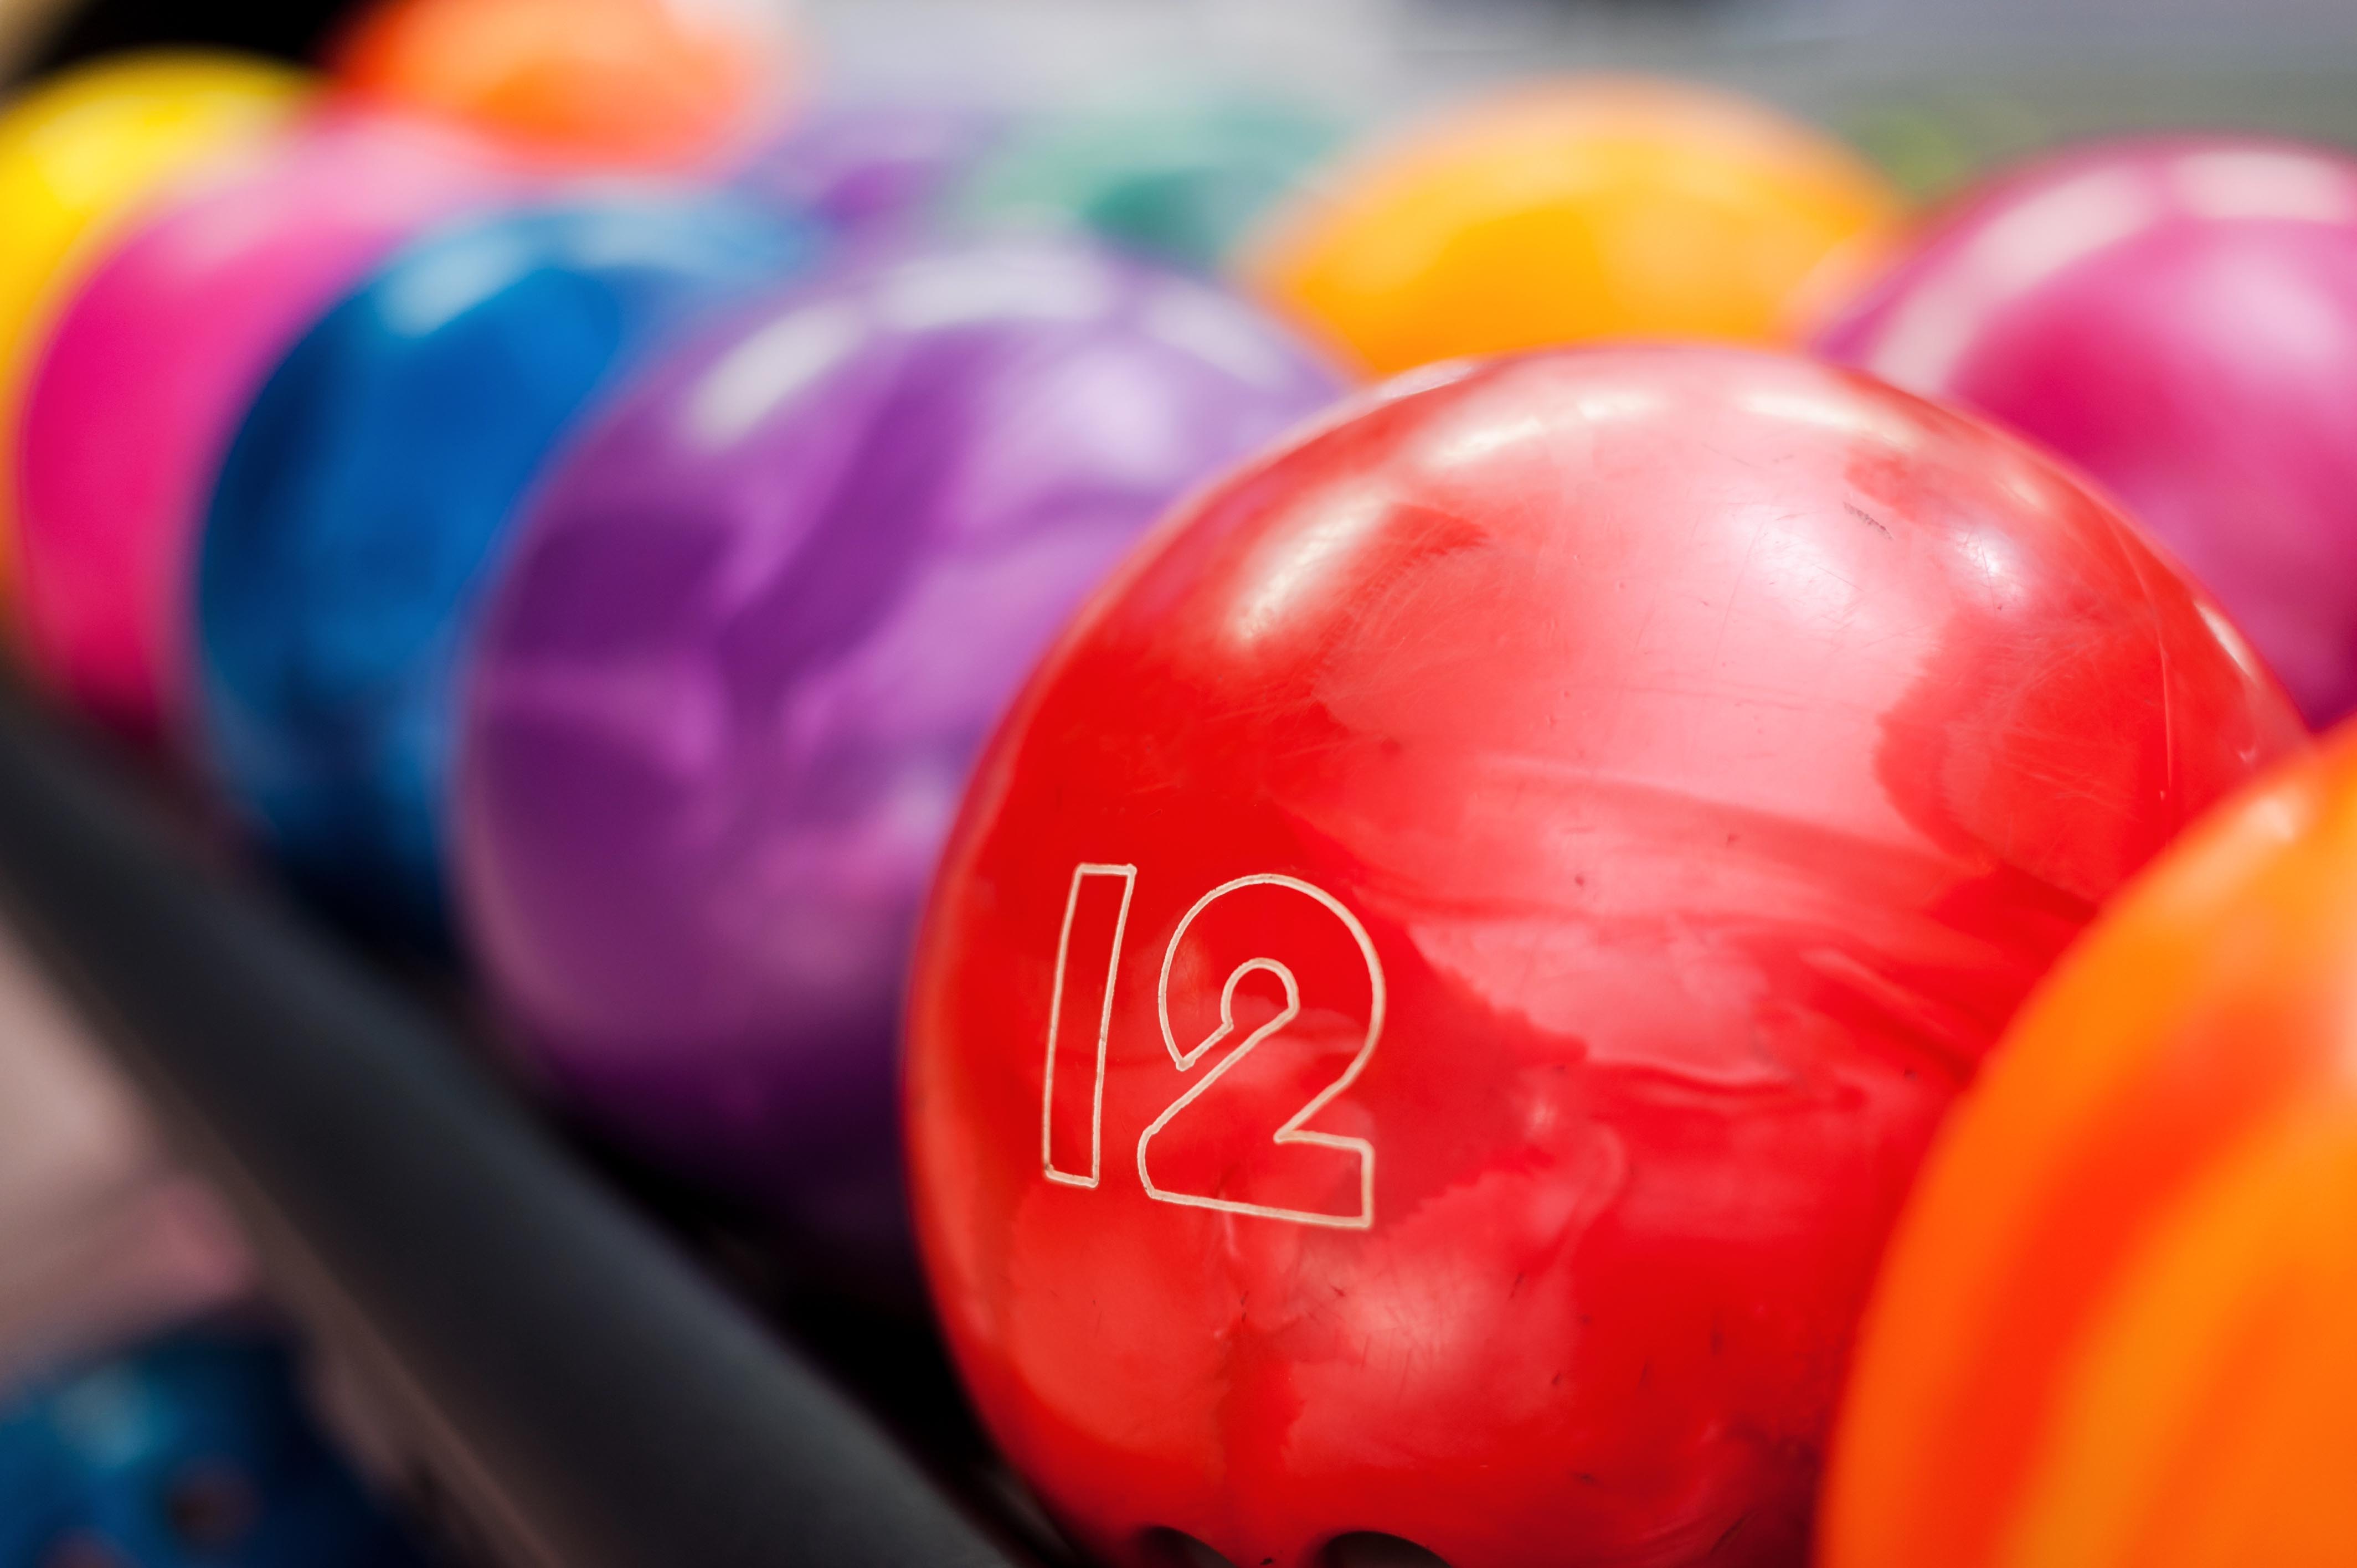 Bowling balls lined up on rack